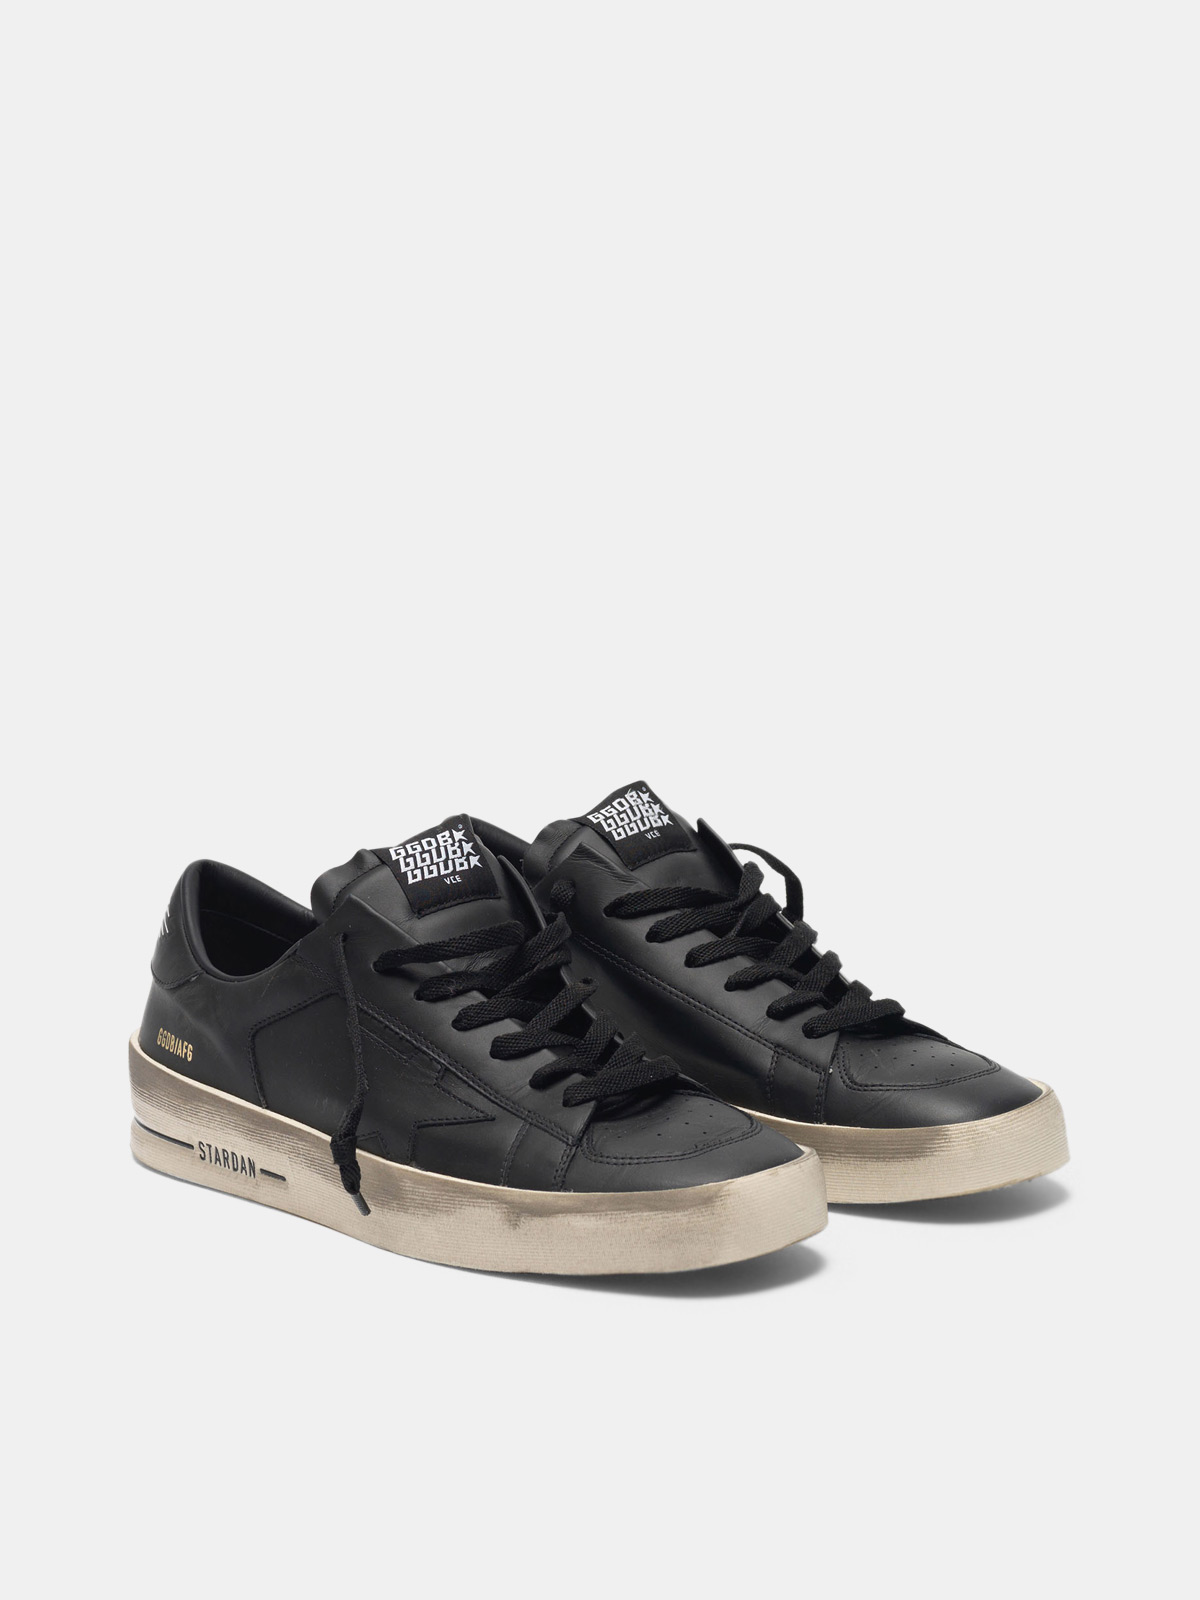 Stardan sneakers in total black leather with vintage finish | Golden Goose